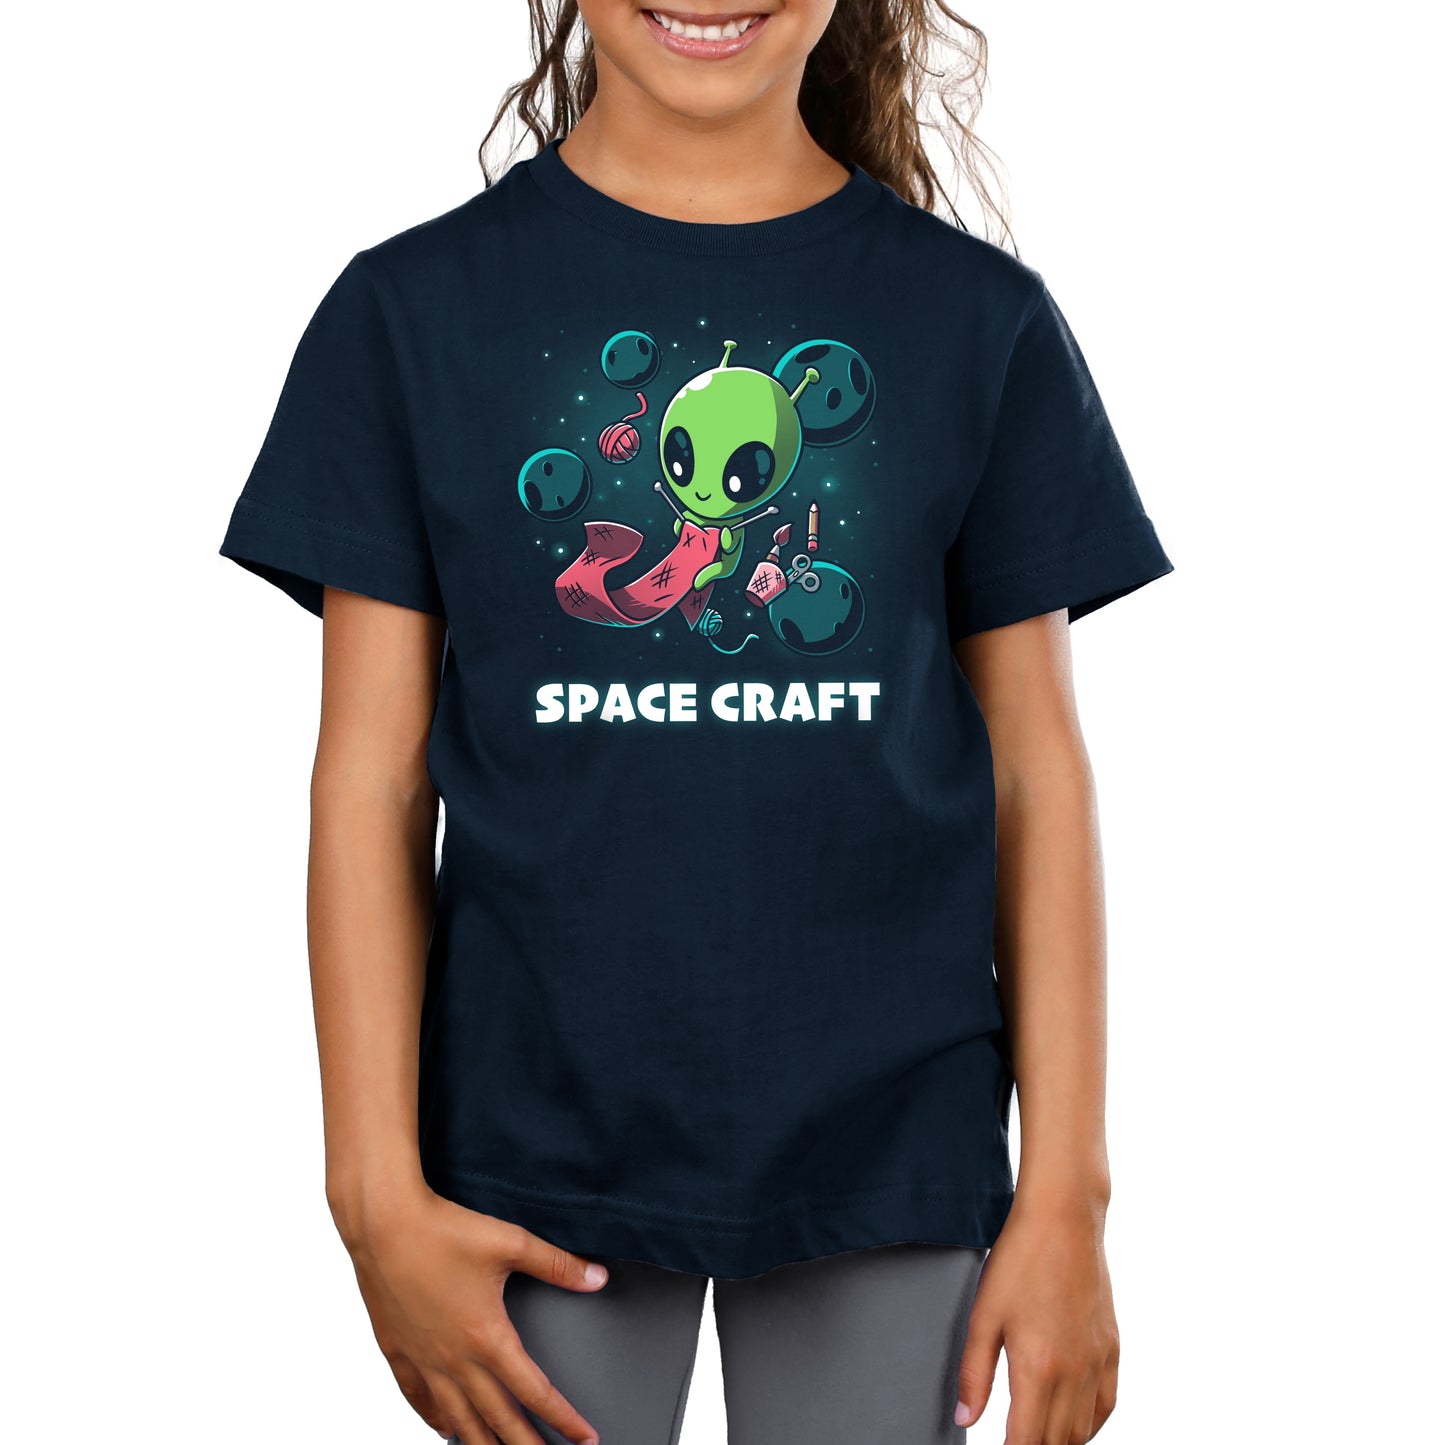 A young girl wearing a navy blue t-shirt with a TeeTurtle Space Craft design.